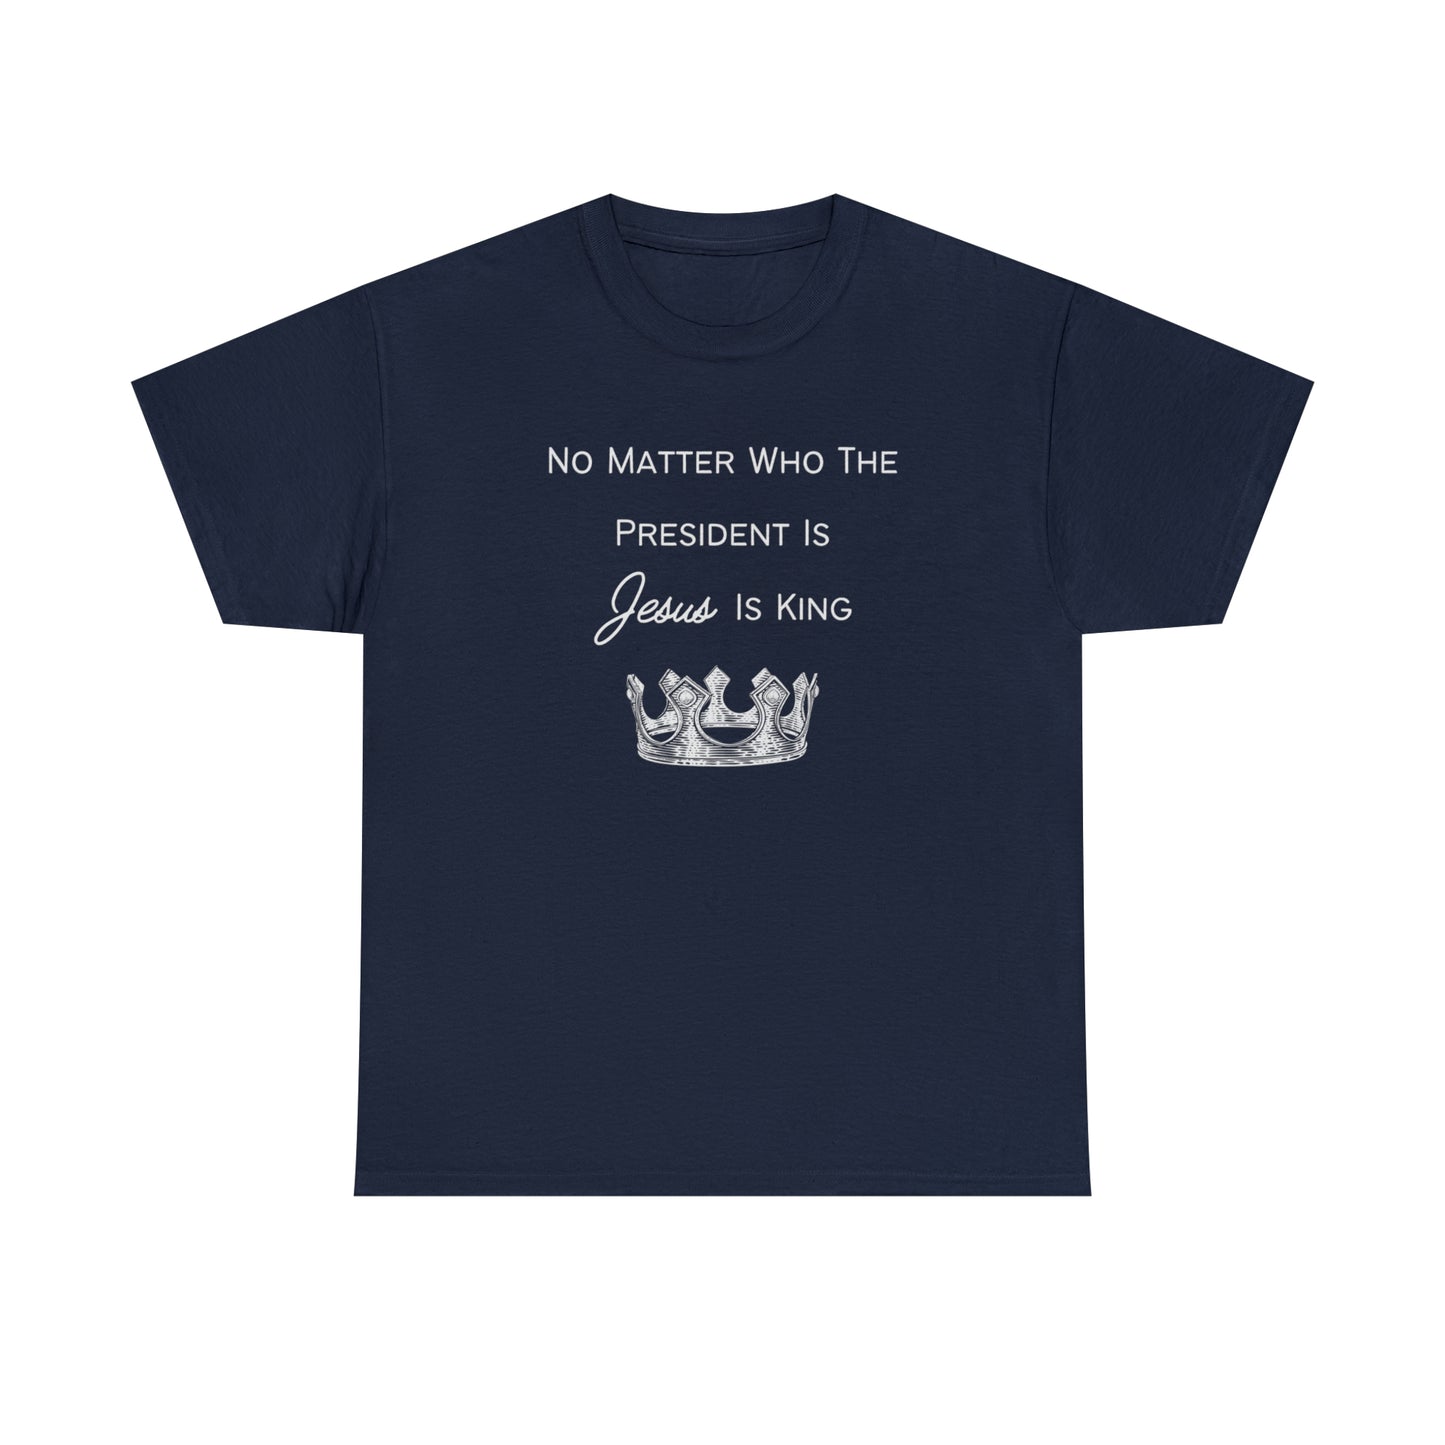 Comfortable and durable "Jesus Is King" t-shirt